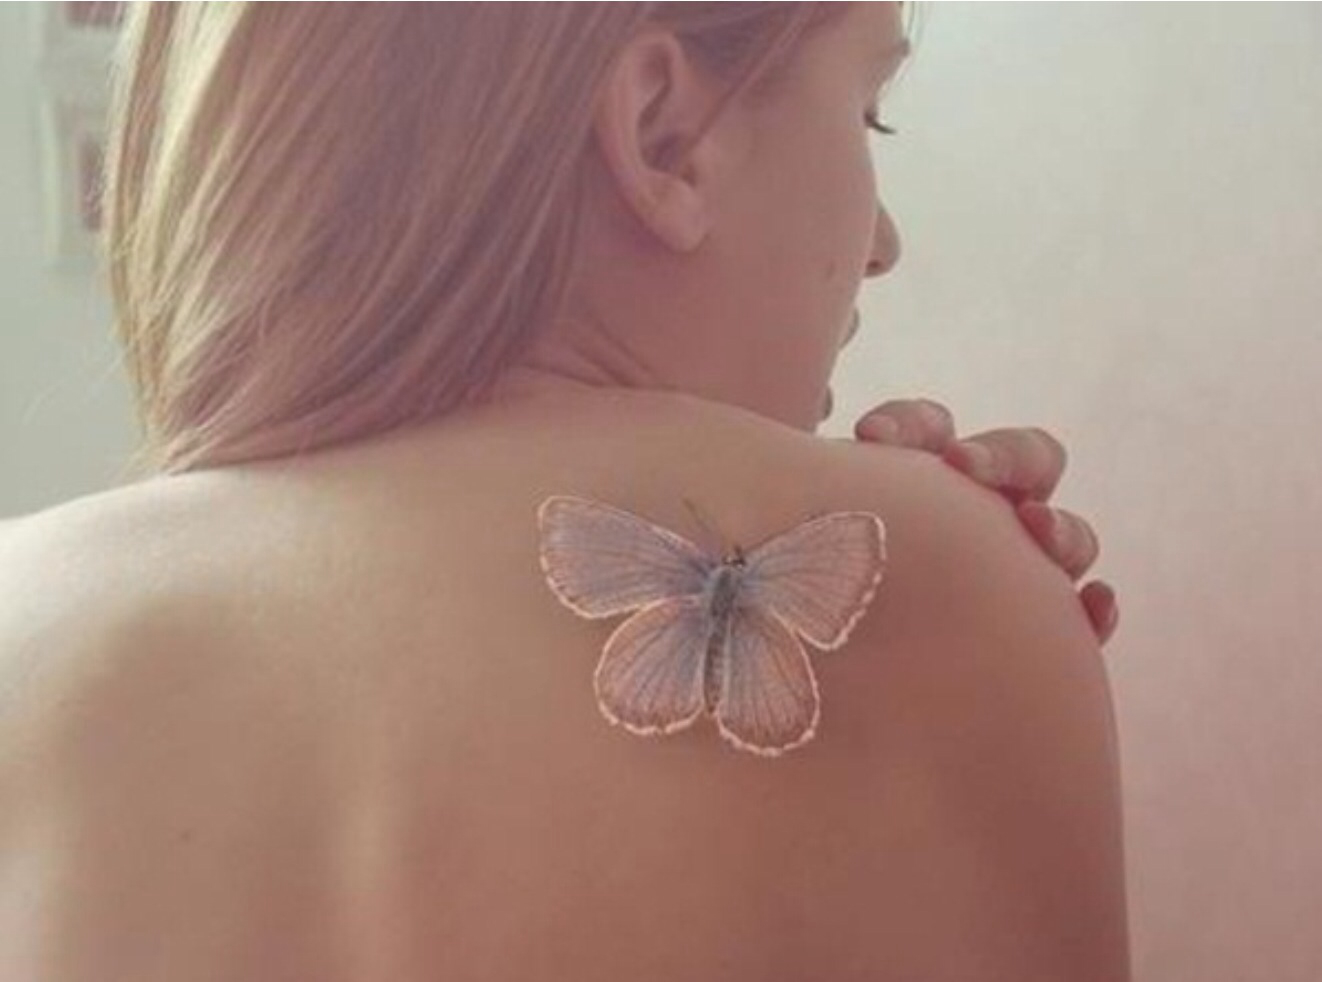 White butterfly tattoo on girl’s right shoulder.